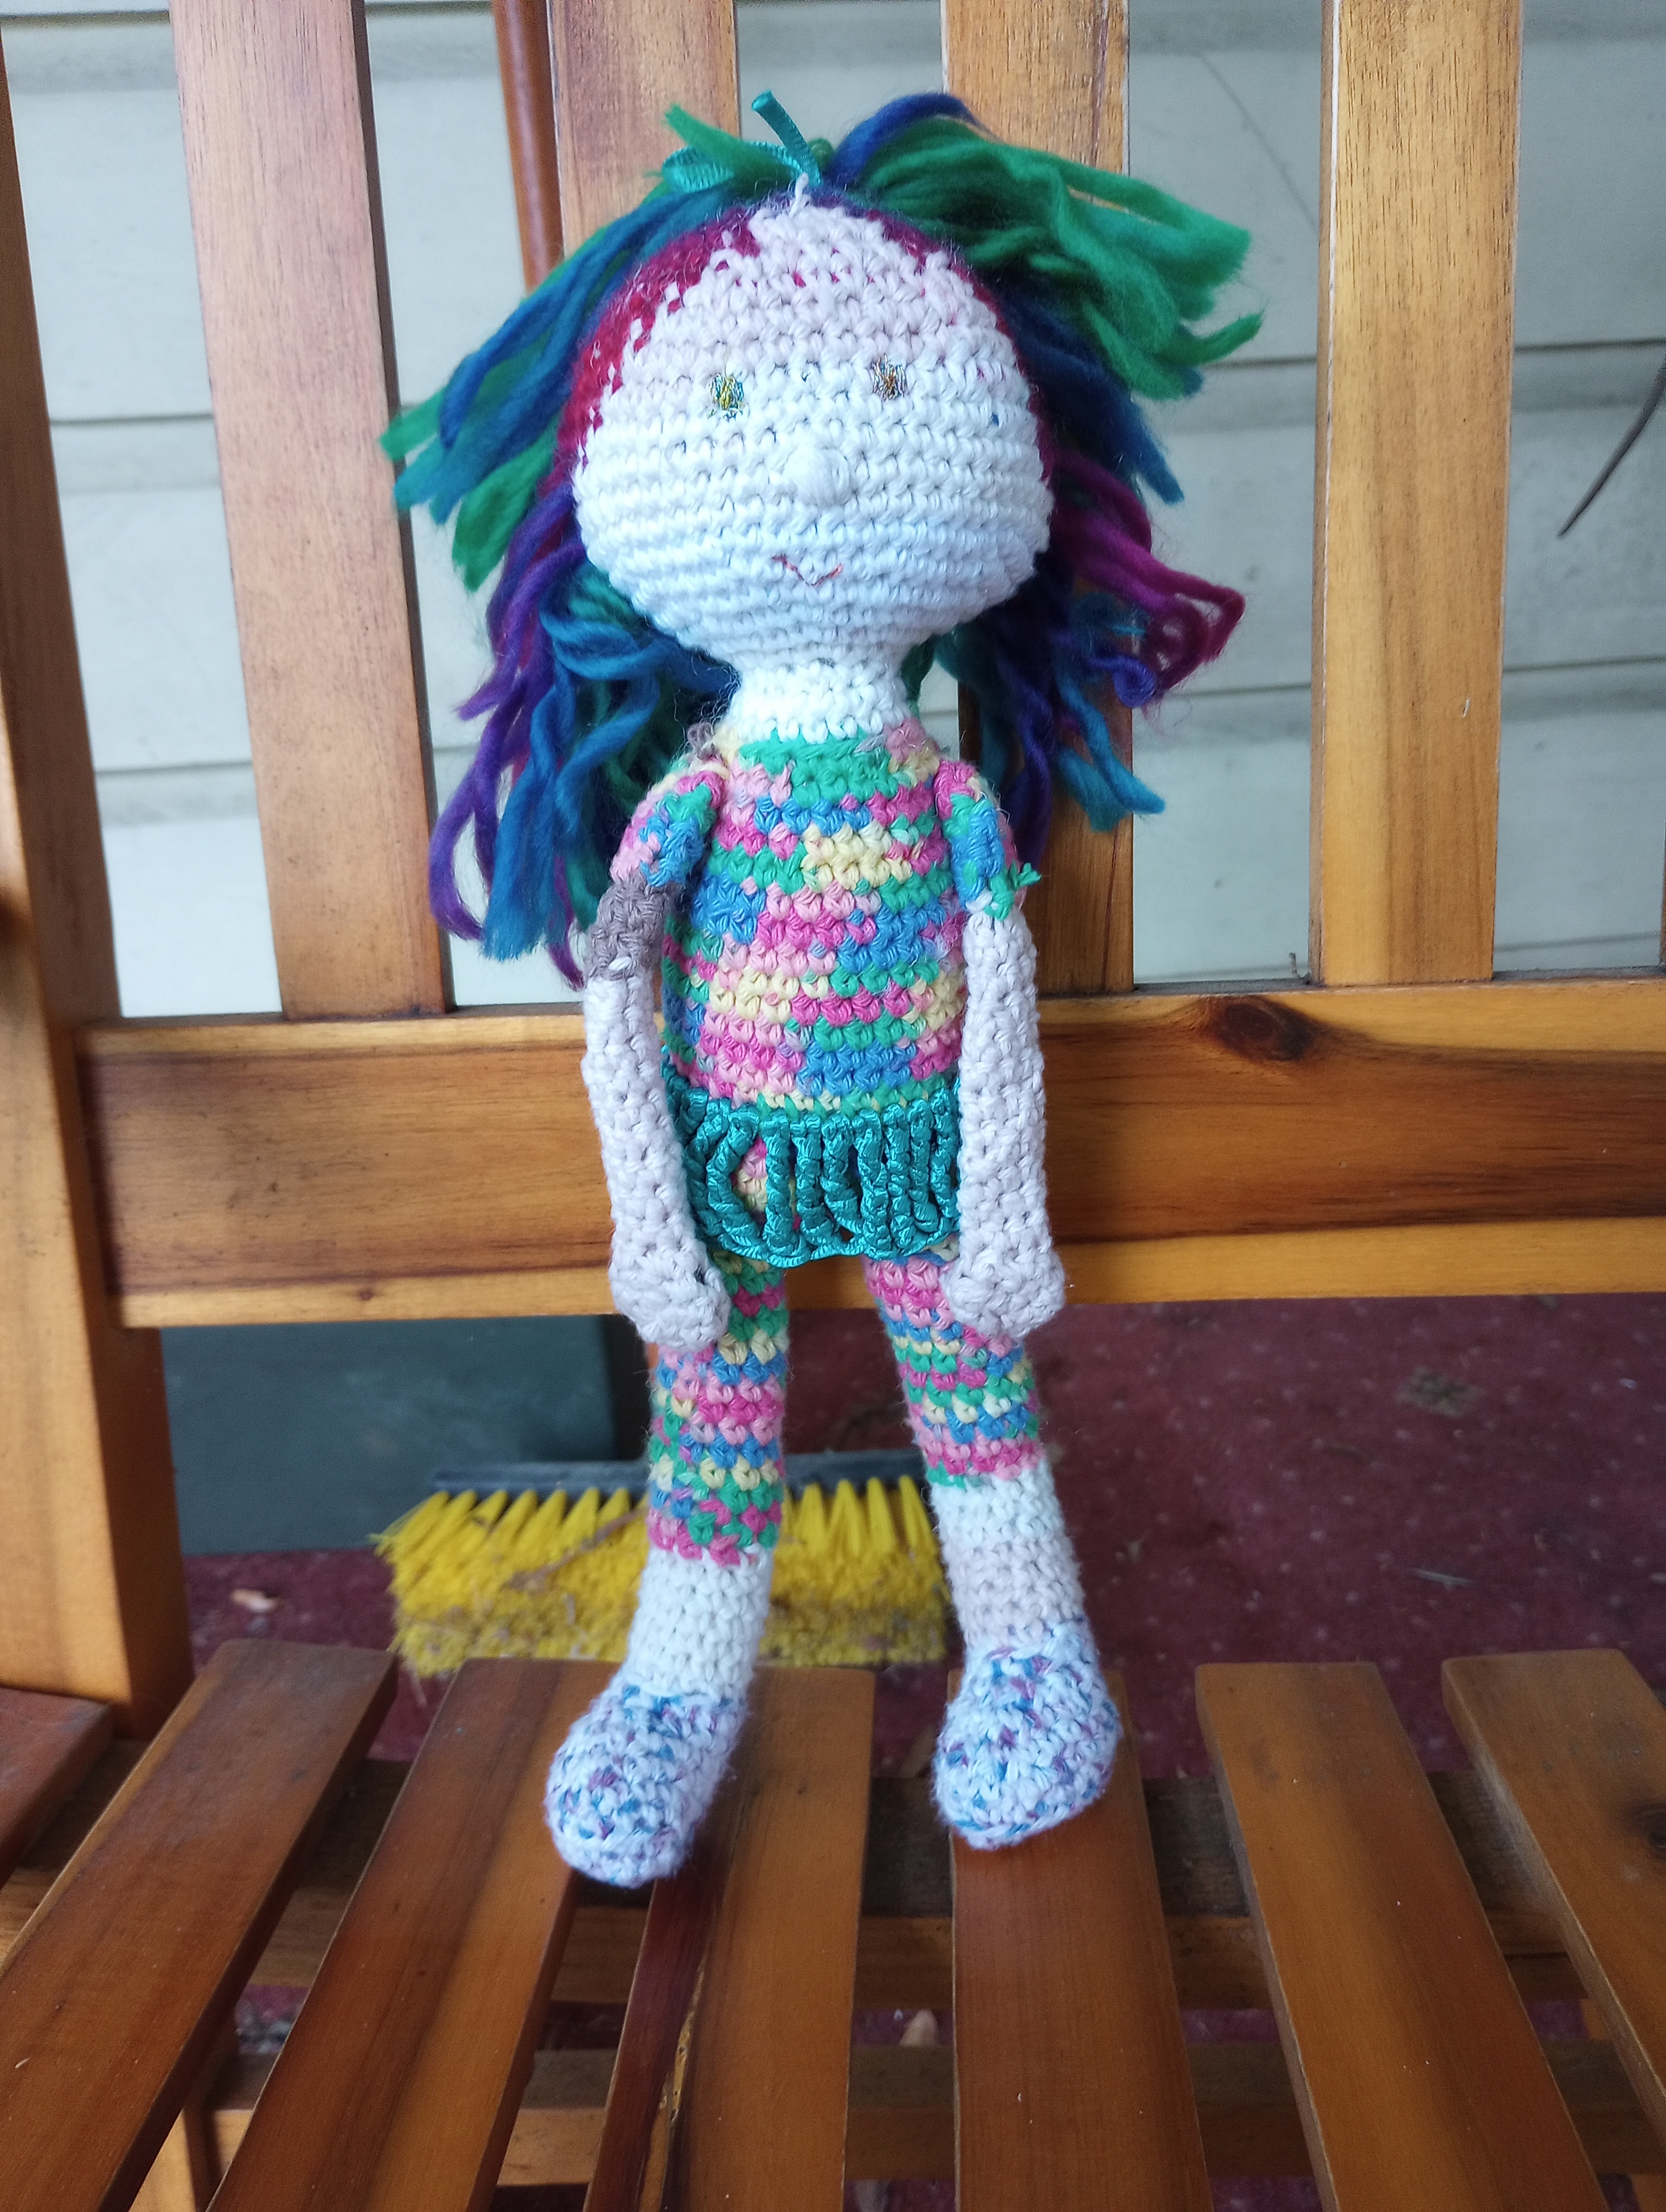 A crocheted doll with pale skin in variegated cream stripe yarn, sparkly eyes, long fluffy rainbow-colored hair pulled into a half-ponytail on top, blue and white spotted shoes, and a rainbow-colored leotard with a teal ribbon skirt.